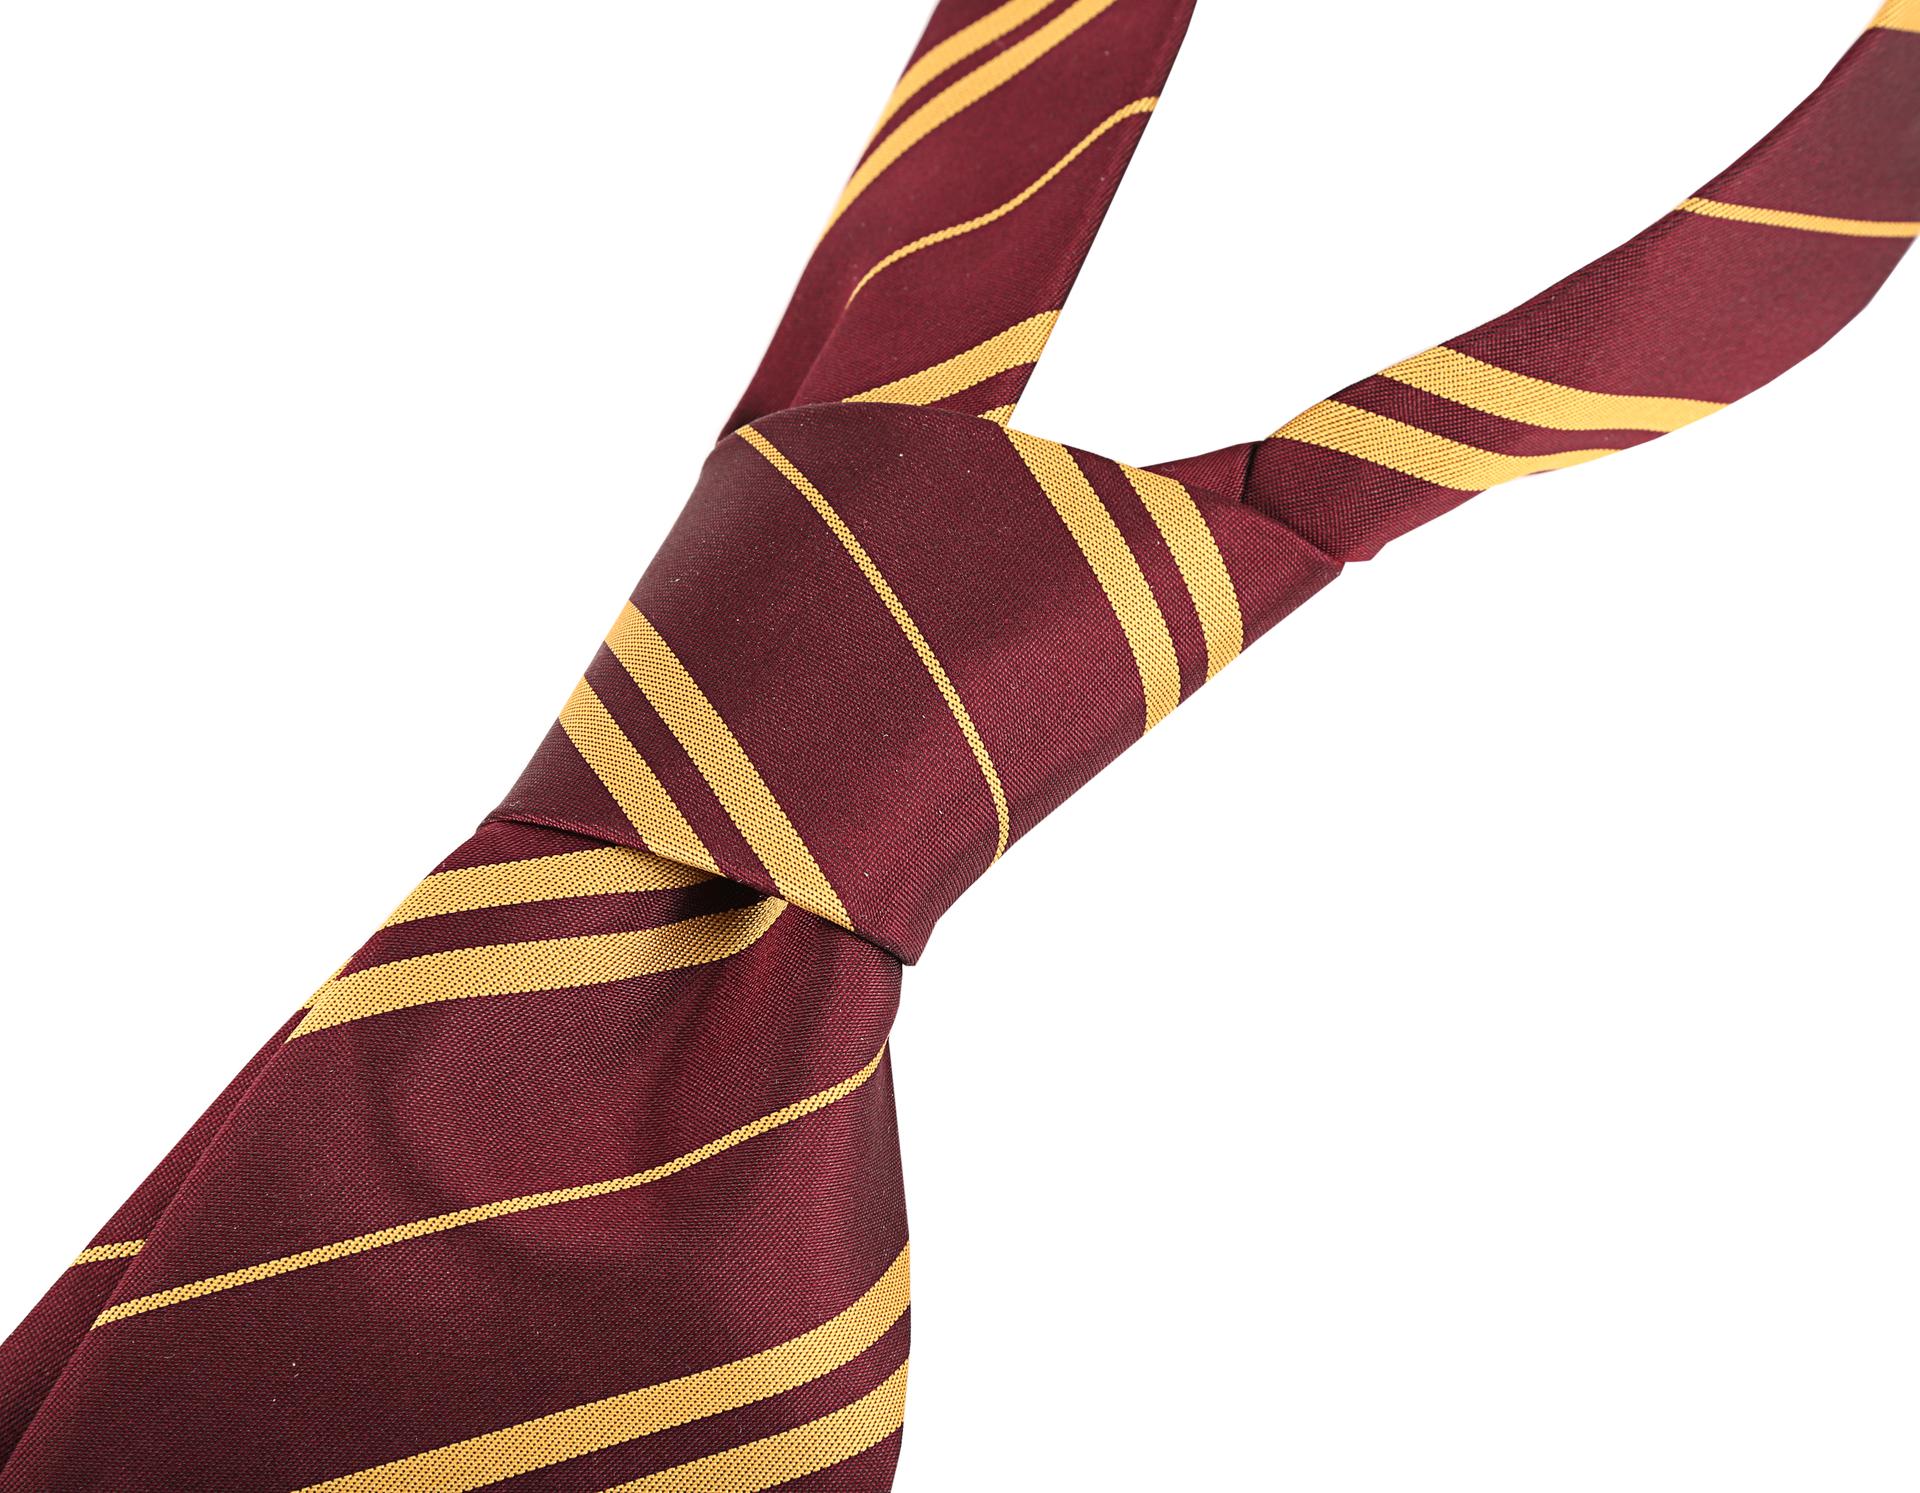 Lot 165 Harry Potter And The Deathly Hallows Part 2 2011 Gryffindor House Tie 2 